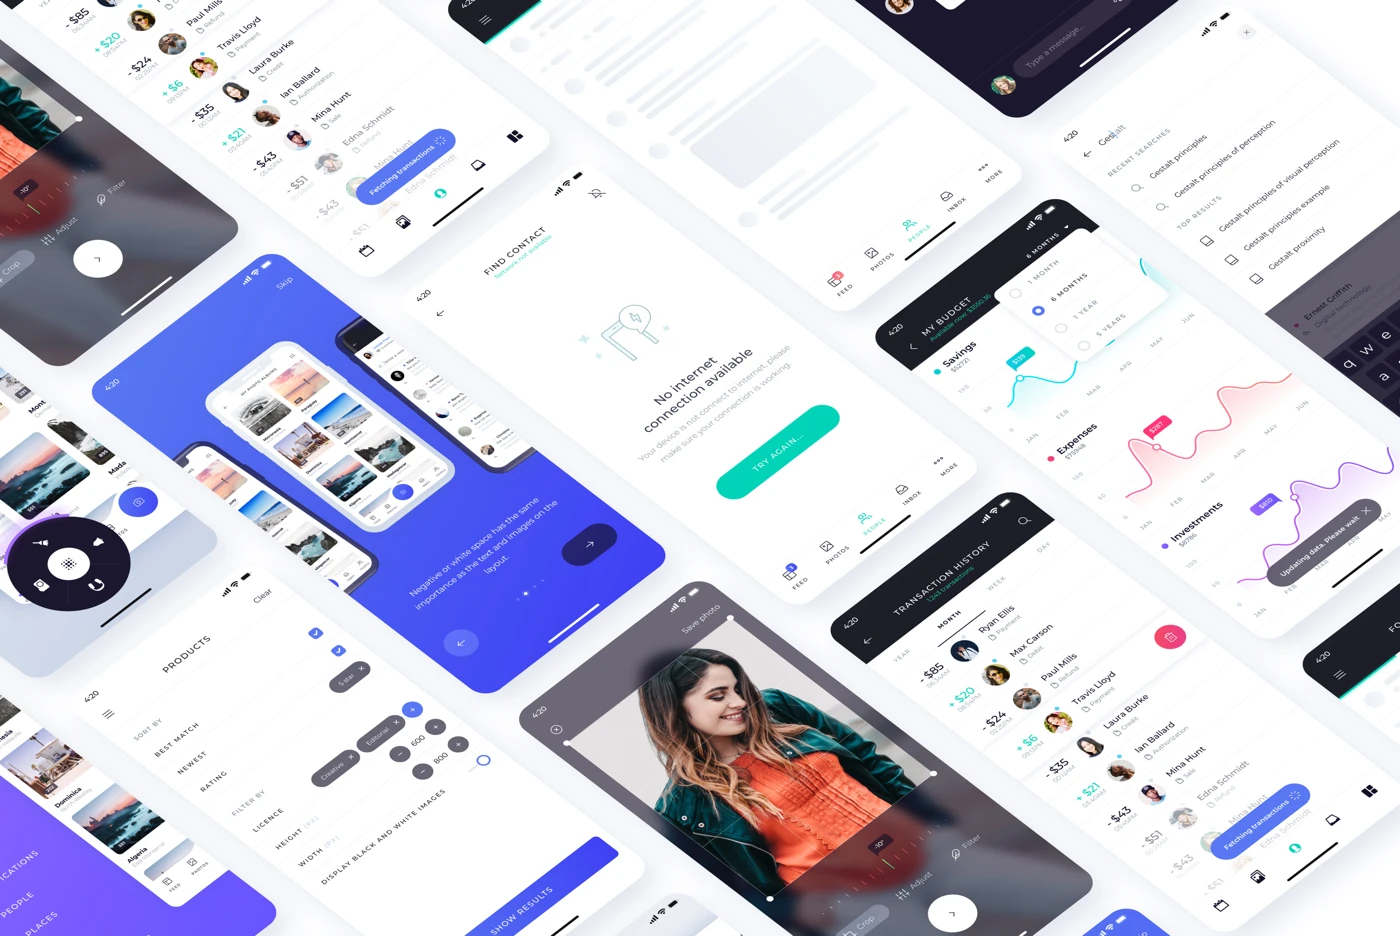 Atro Mobile UI Kit Freebie - Whatever you need a nudge to start work on your idea, find inspiration or just want to add Atro Mobile UI kit to your freebie toolbox, go ahead and grab this awesome mobile UI kit containing 12 beautiful handpicked screens for free.